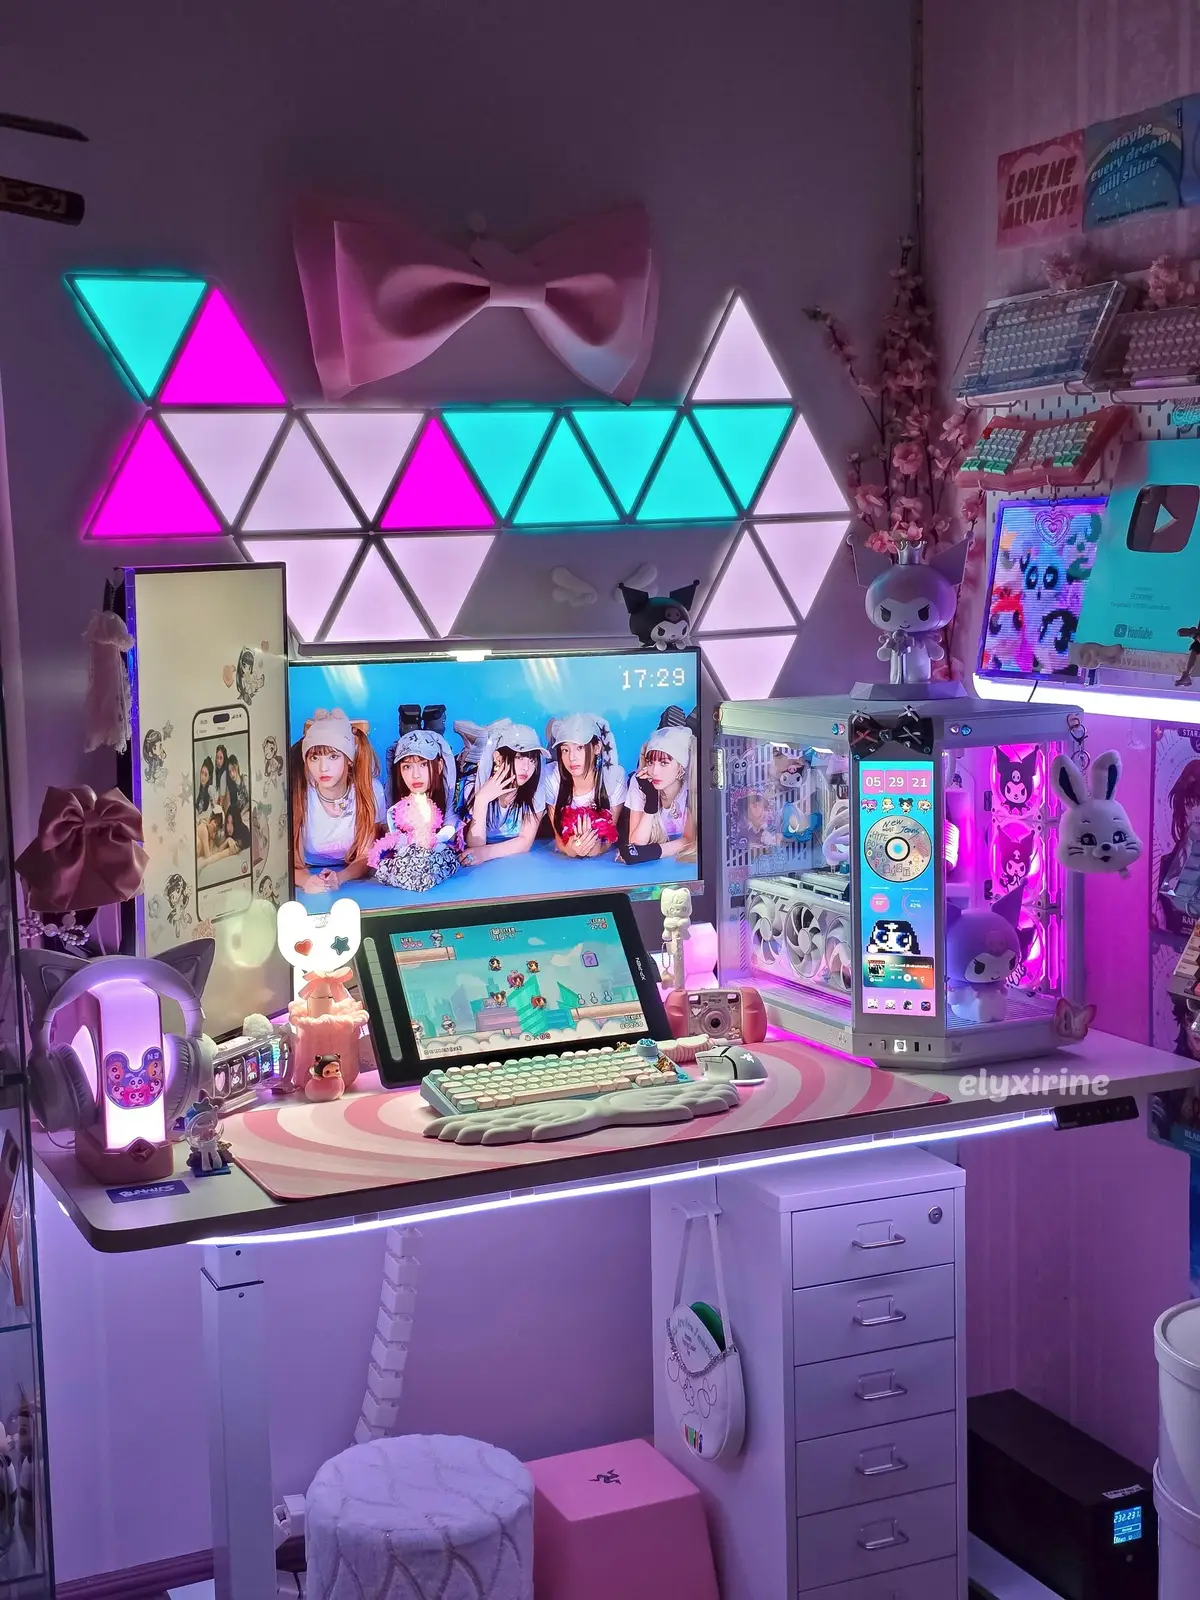 I'm still diggin' my 57th monthly themed setup from May, NewJeans themed battlestation 🐰 but now with a few changes! my gaming area feels so much cozier and looks brighter than before 🥹 what do youu think?  new setup upgrades:  • XP-PEN Artist 16 pen display gfted by @Le Petit Prince and @XPPen Official  • Govee triangle light panels (bday treat for myself hehe) @govee • installed a white wallpaper in my PC area only happy saturdayy gamers! stay hydrated ✨ #newjeans #pcsetup #pcbuild #hyte #hanni 